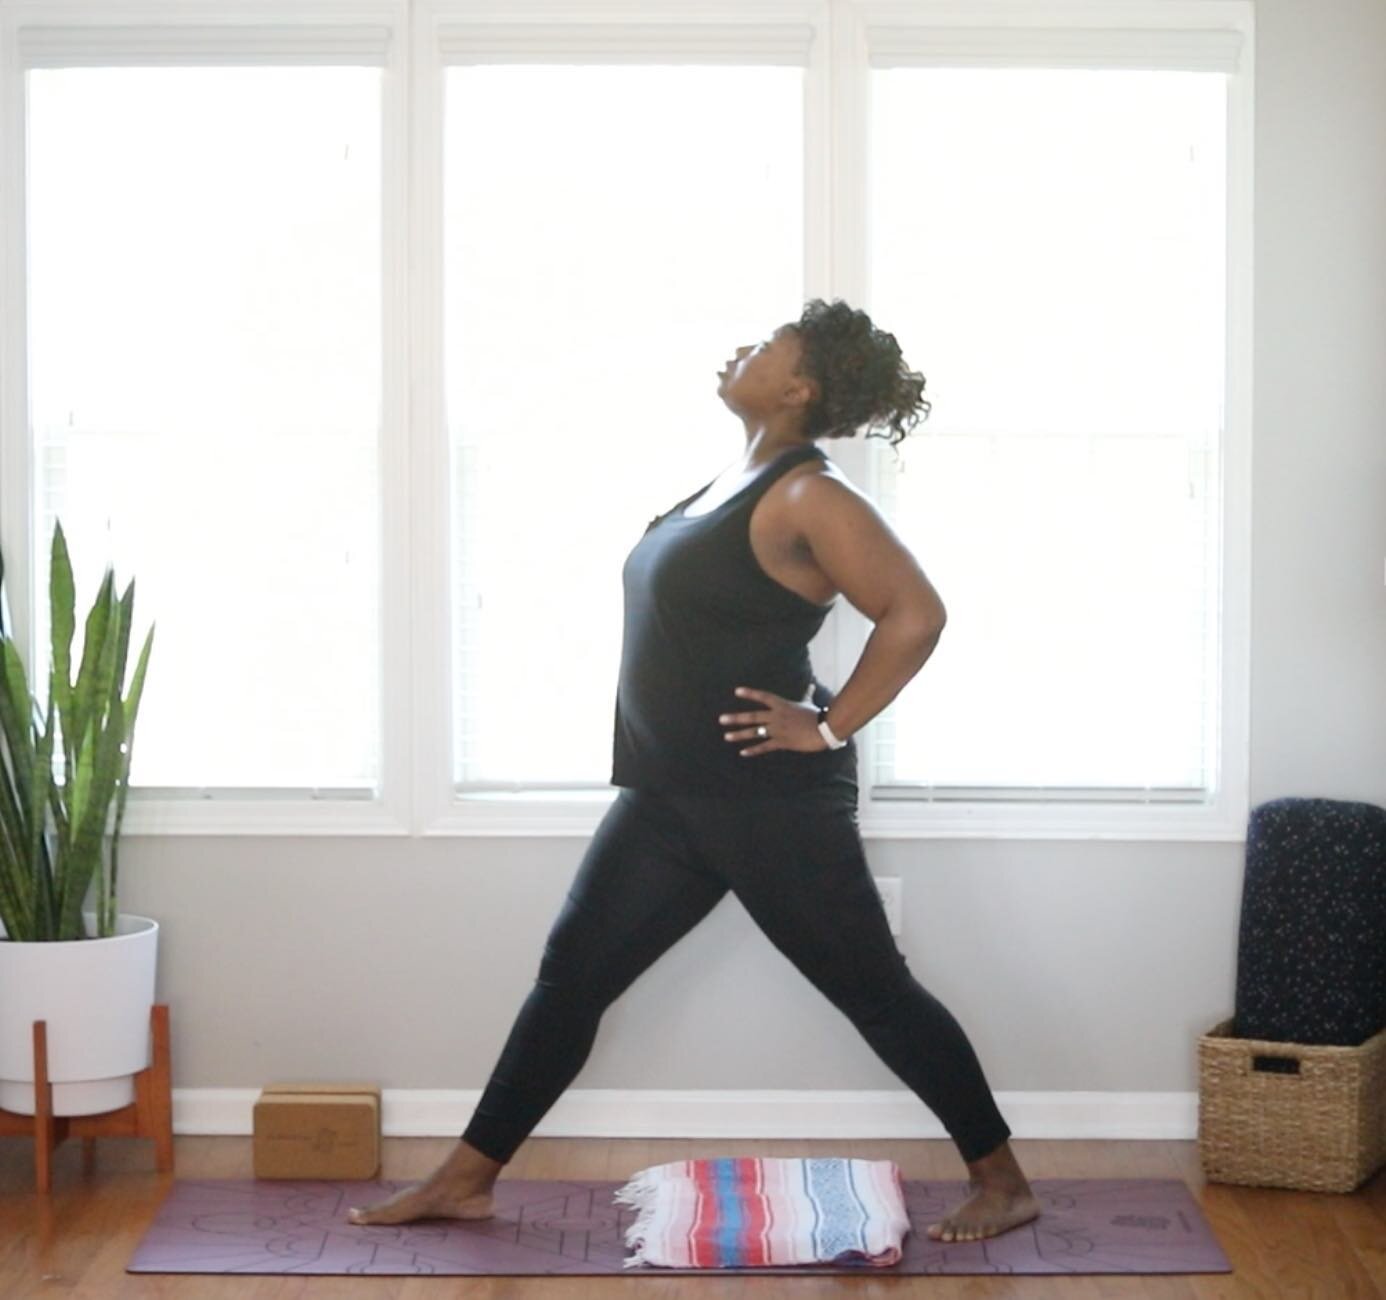 💃🏽On Monday the 13th my new Everyday Yoga series launches on YouTube! It&rsquo;s a seven day series that includes 30-minute full body practices. You&rsquo;ll experience slow flow yoga, yin yoga, meditation and breathwork. But it&rsquo;s NOT a yoga 